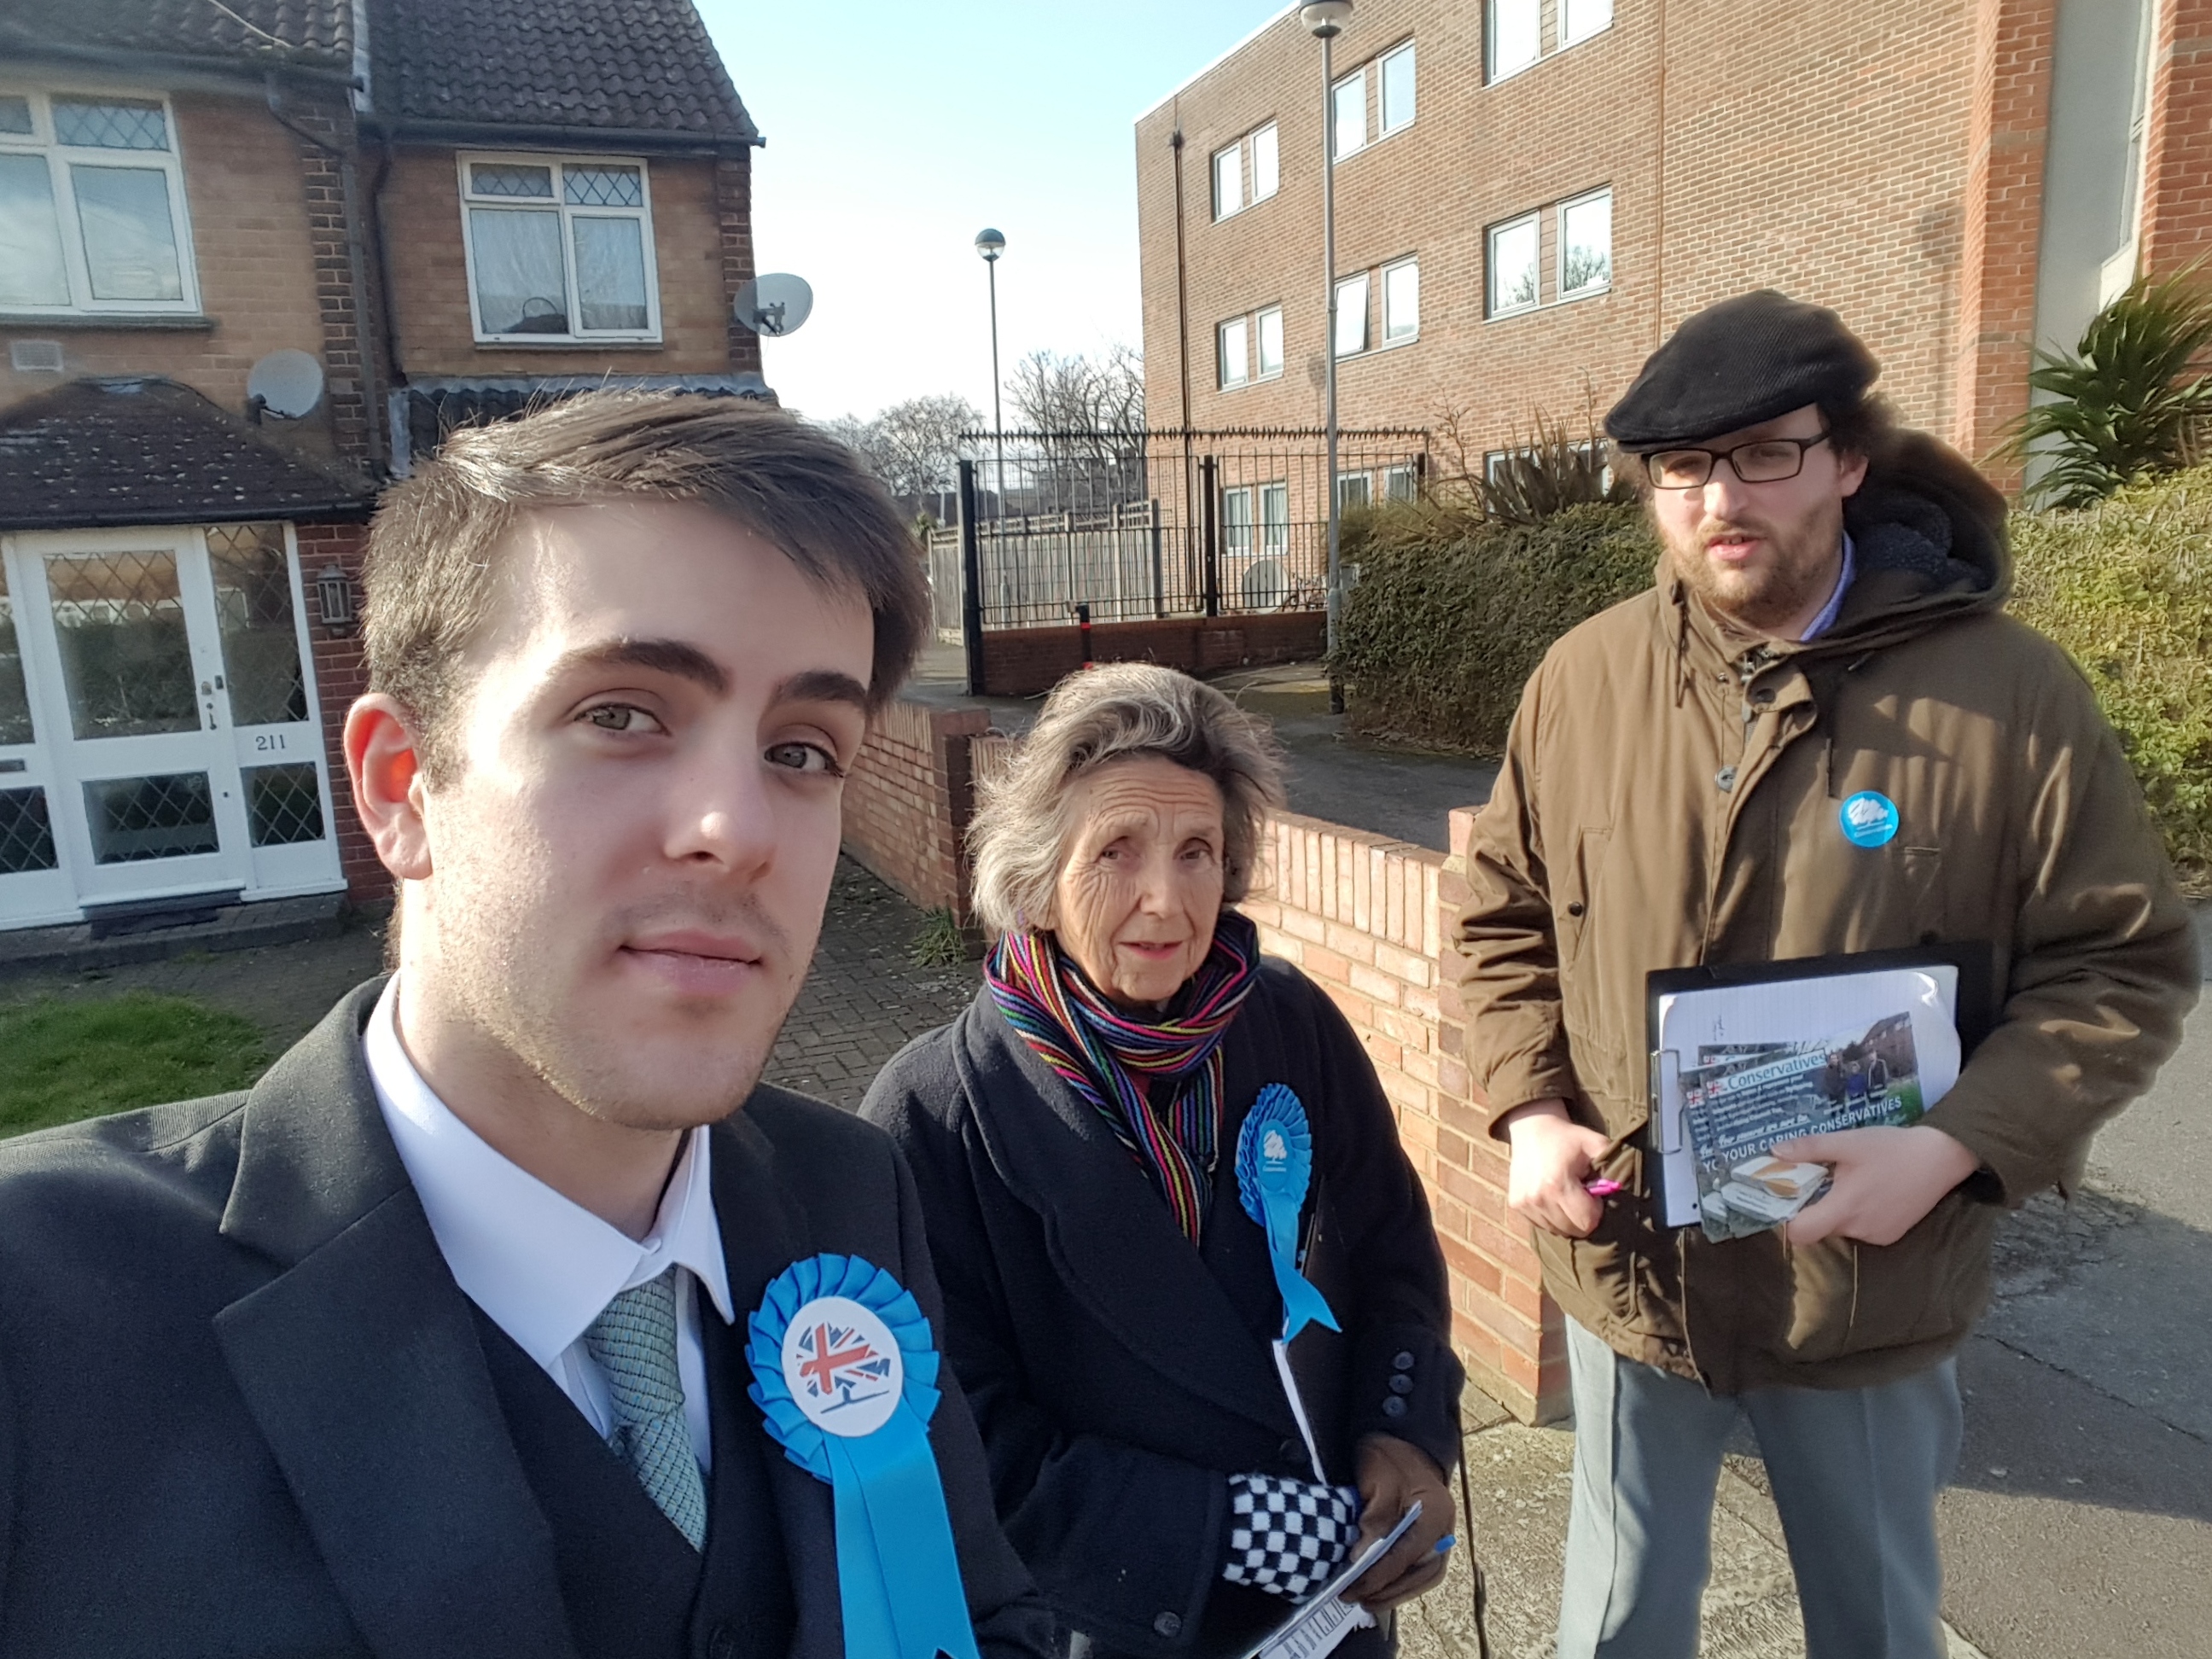 Association members out canvassing